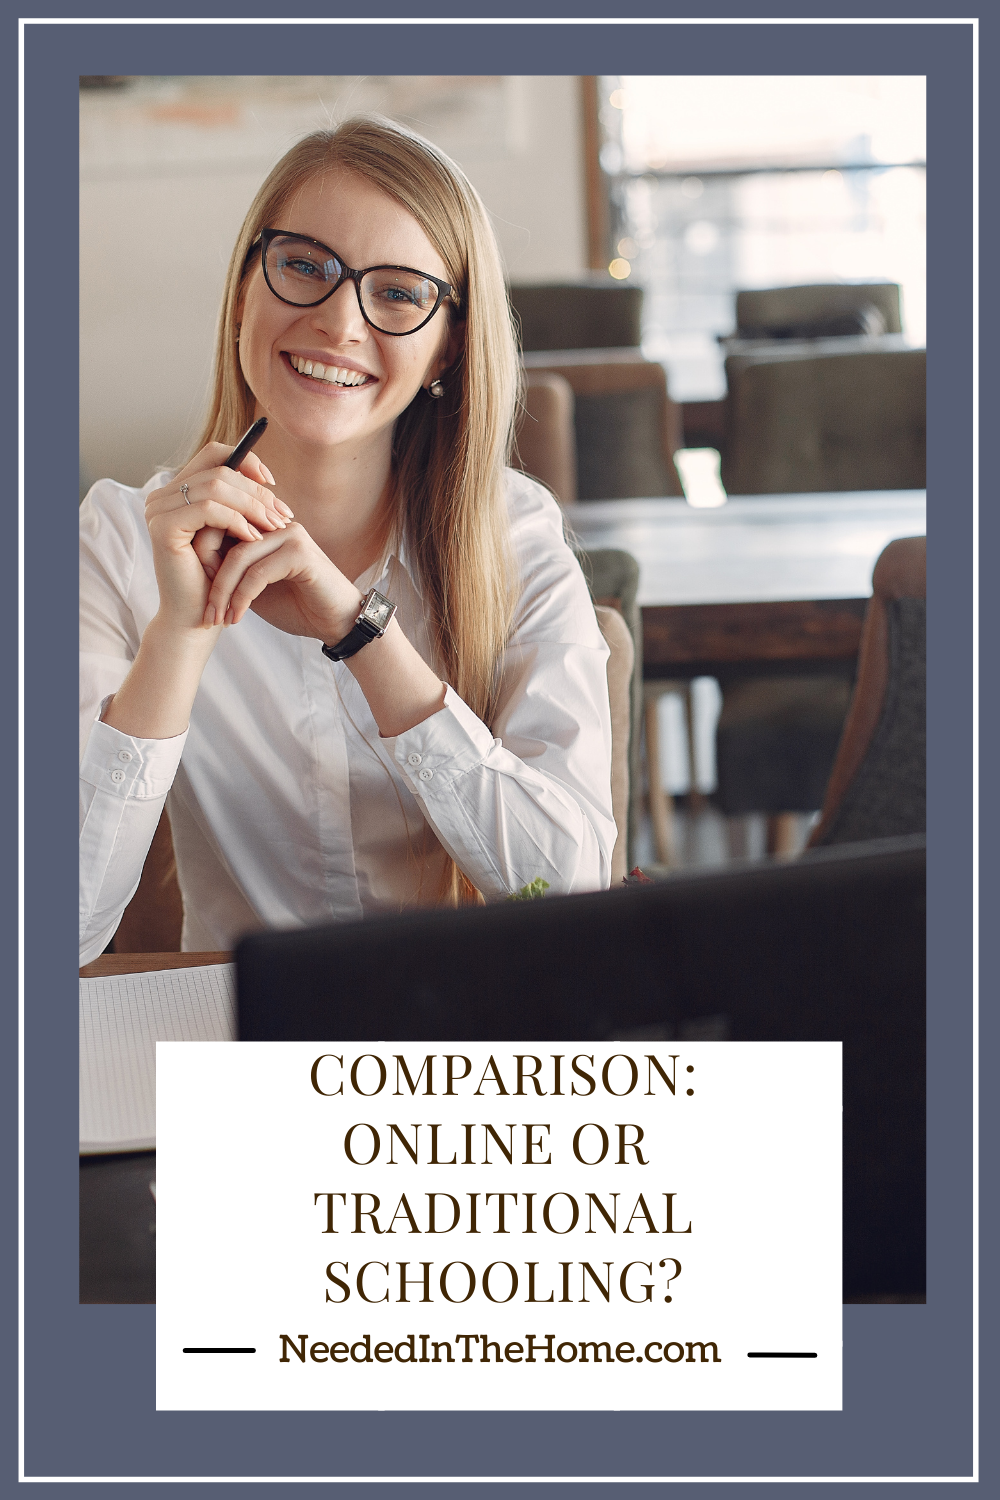 pinterest-pin-description comparison: online or traditional schooling? woman smiling wearing glasses in classroom behind monitor neededinthehome